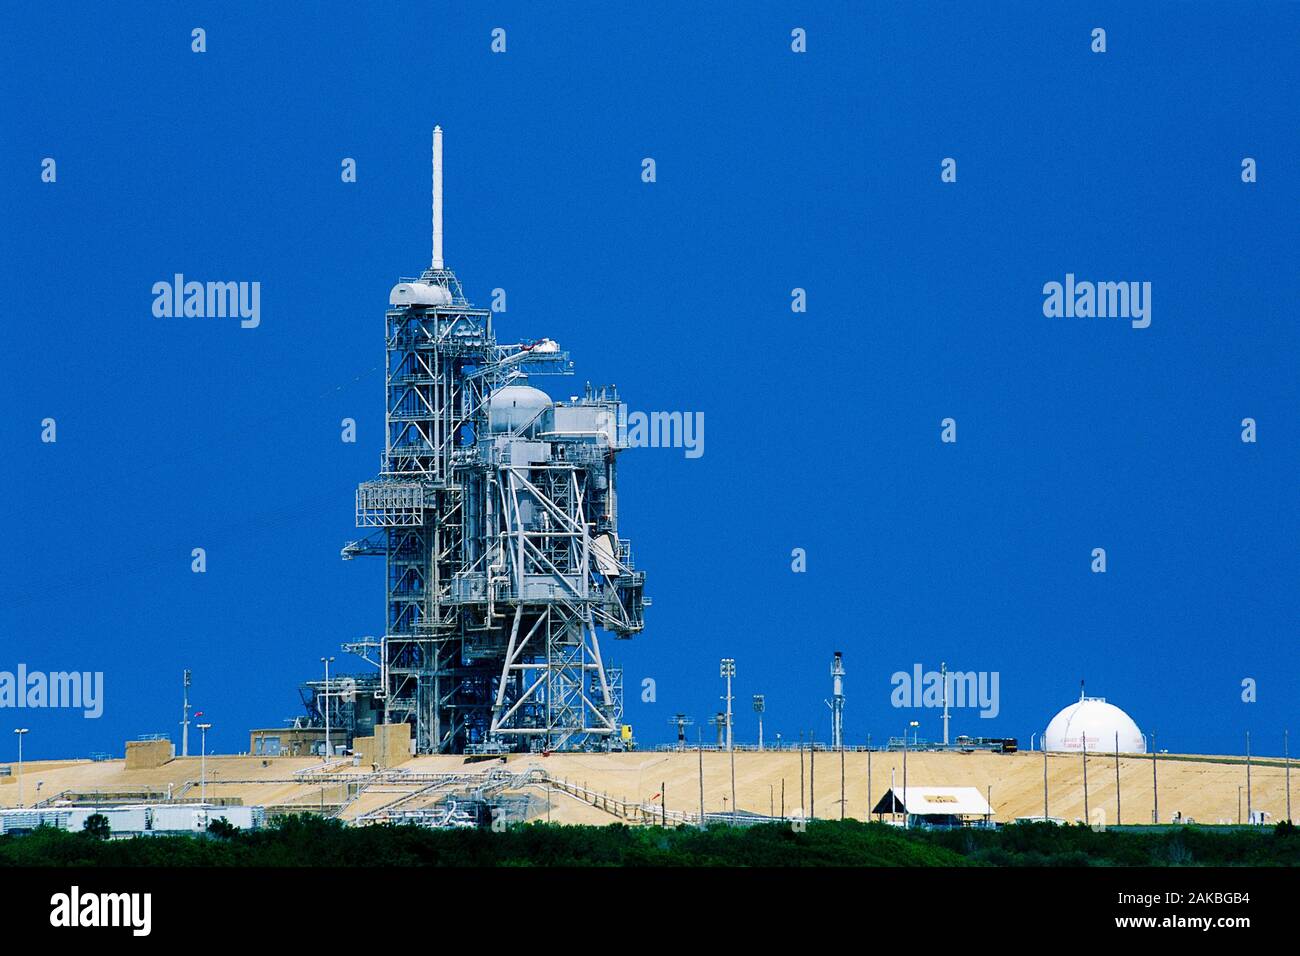 Shuttle launch pad, Kennedy Space Center, Cape Canaveral, Florida, USA Stock Photo